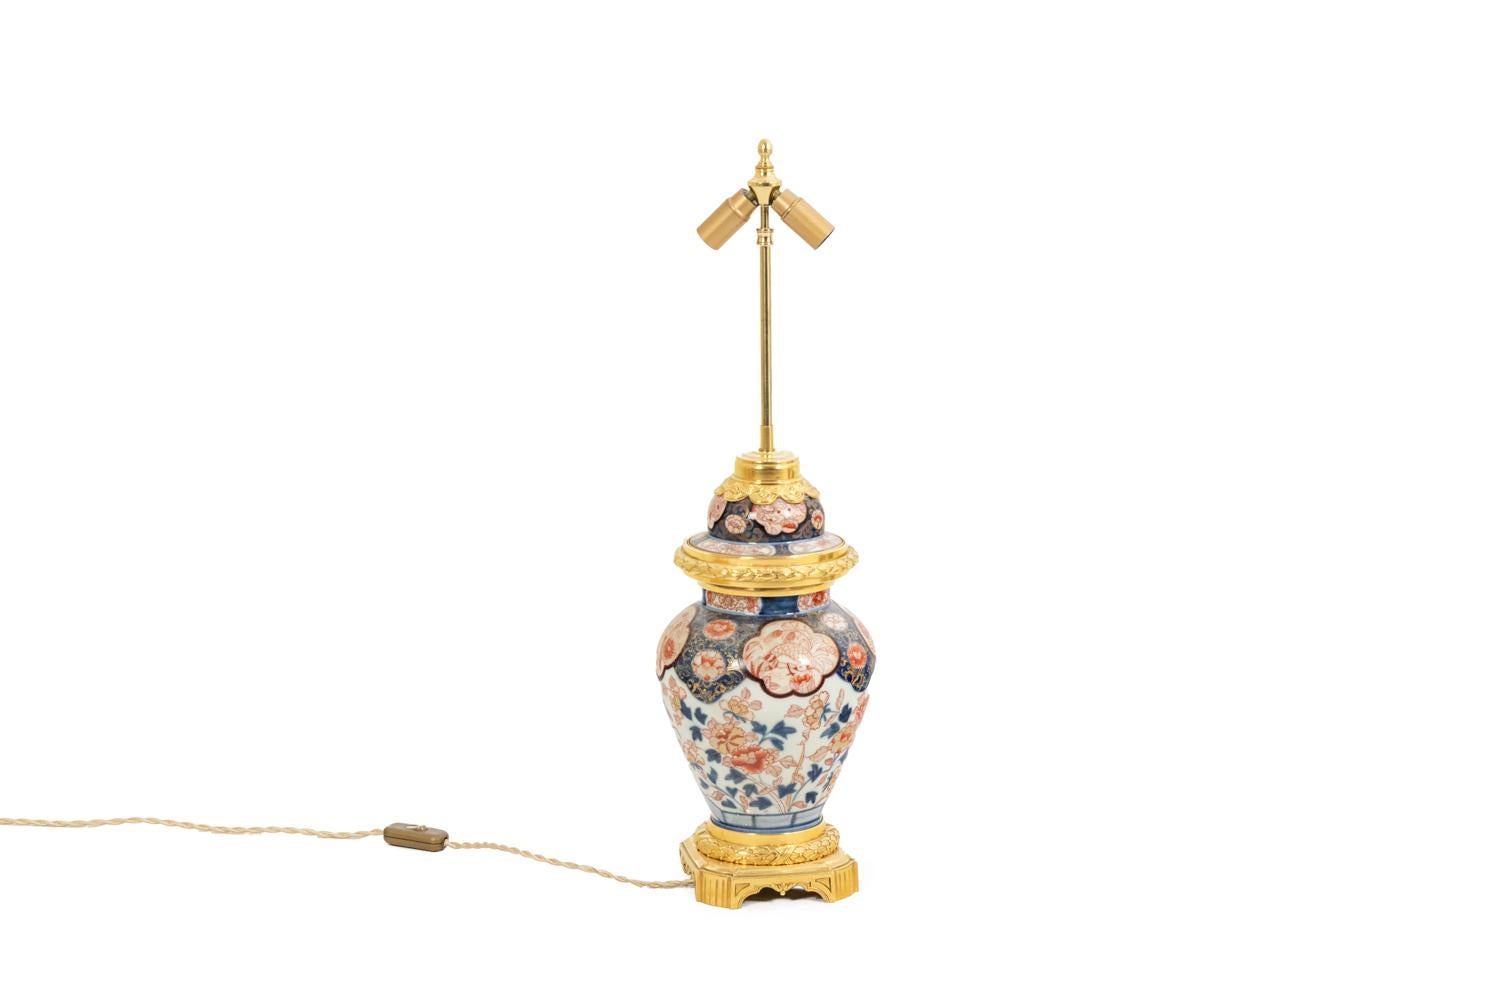 Lamp in Imari porcelain and gilded bronze, adorned with flowers and foliage, in shades of saffron red, cobalt blue and on an ivory white background. Quadripod base, with rudent pattern.

Work realized circa 1880.

New and functional electric